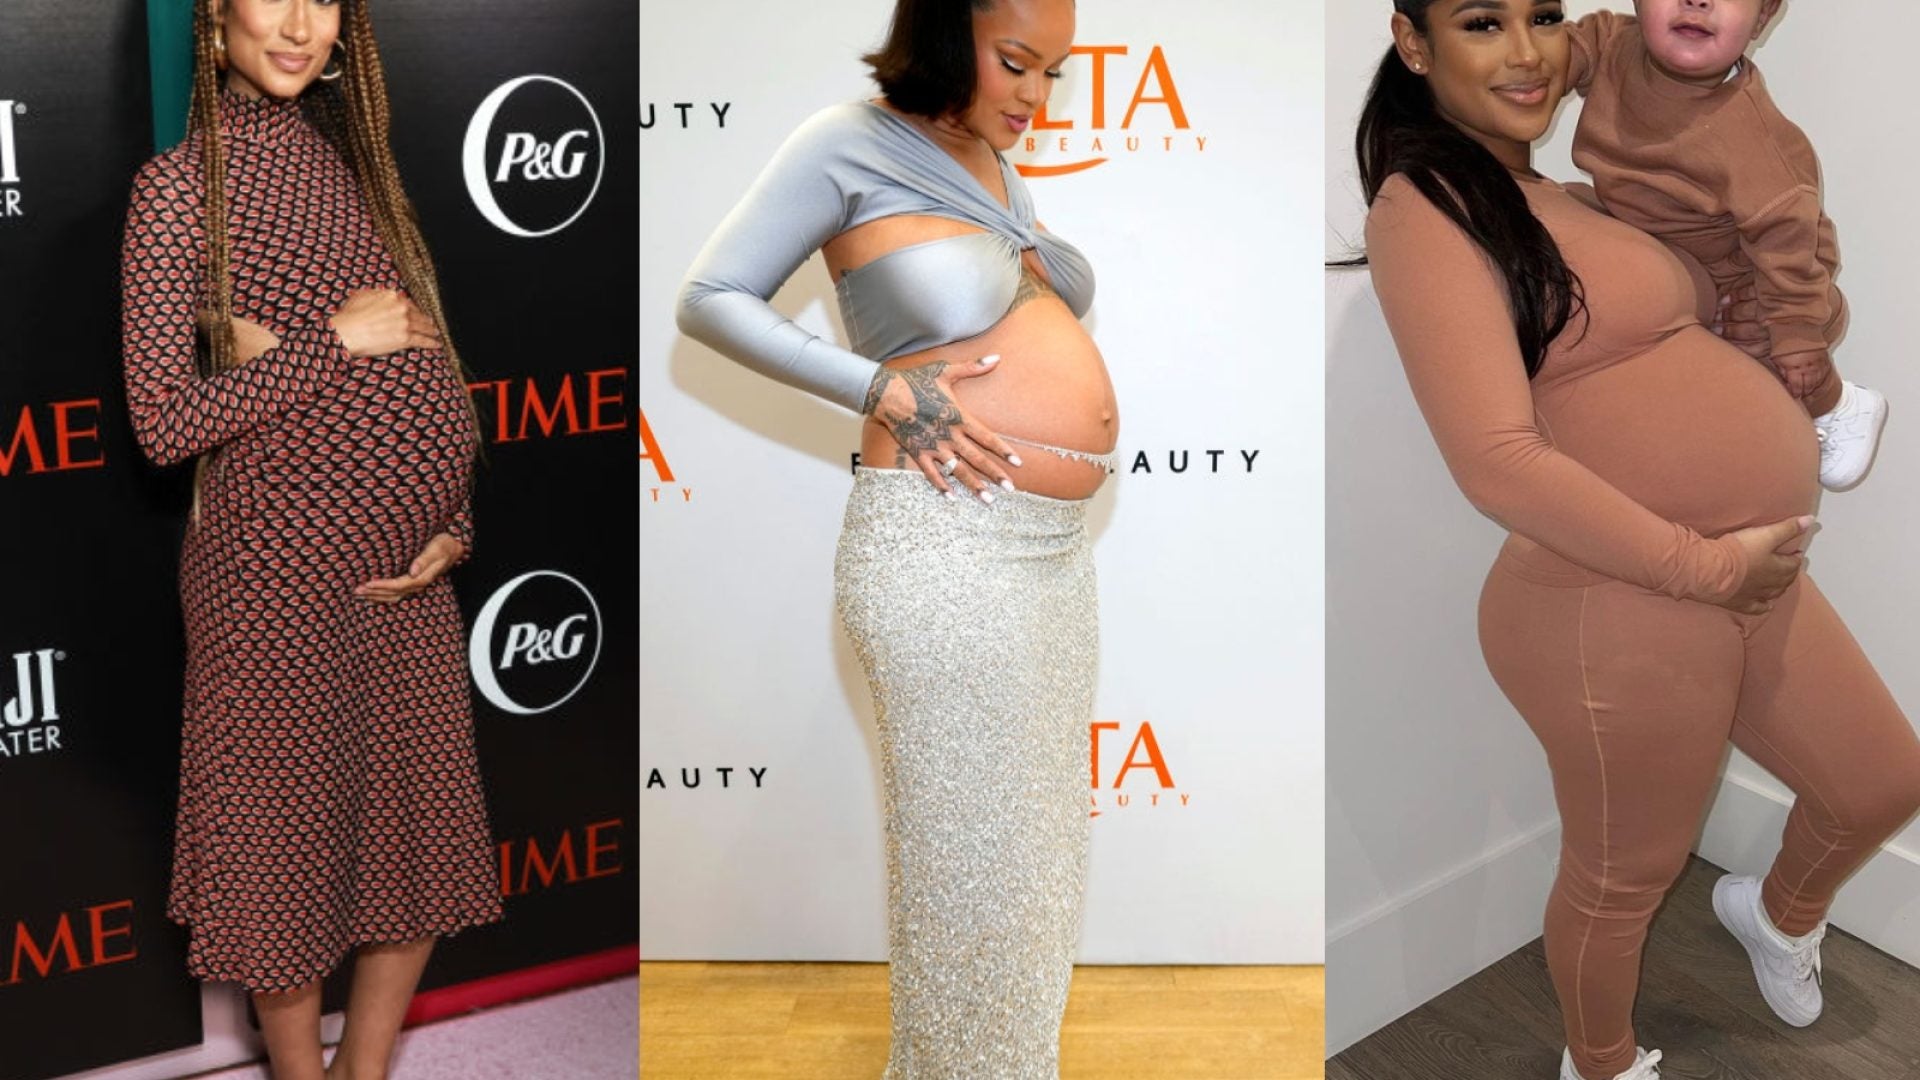 Bumpin' Around: All The Celebrity Women Giving Birth In 2022